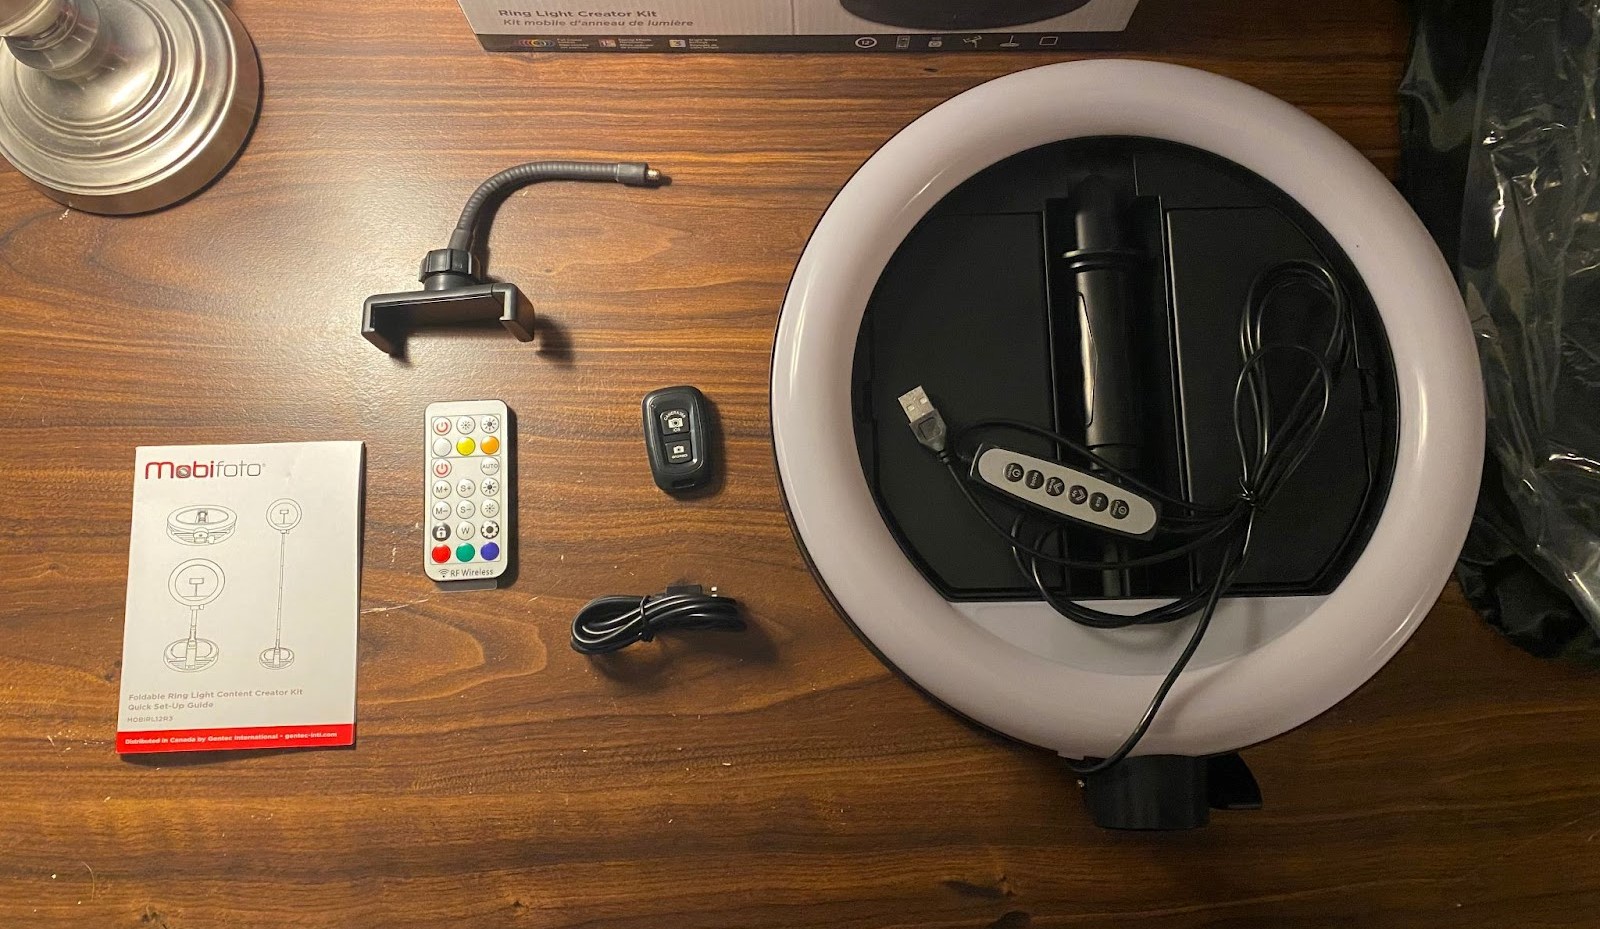 The Mobifoto ring light fully unboxed with the light and it's accessories laid out on a table